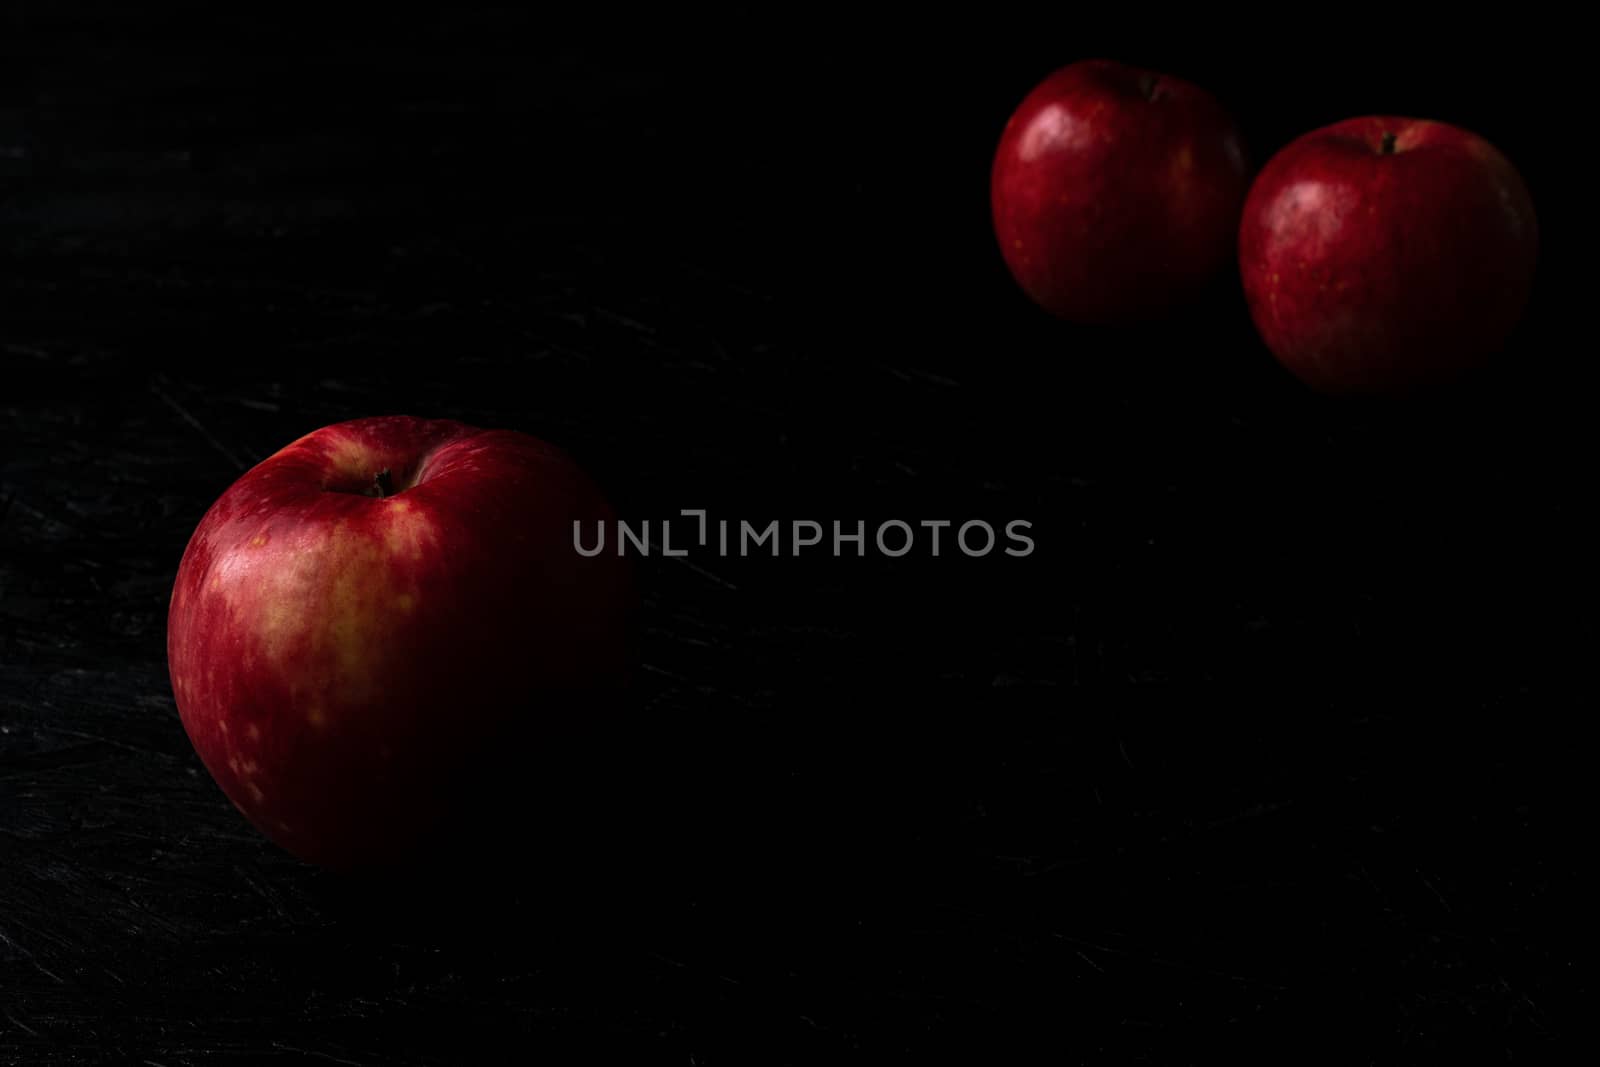 Red apple isolated on the black wooden background by sashokddt